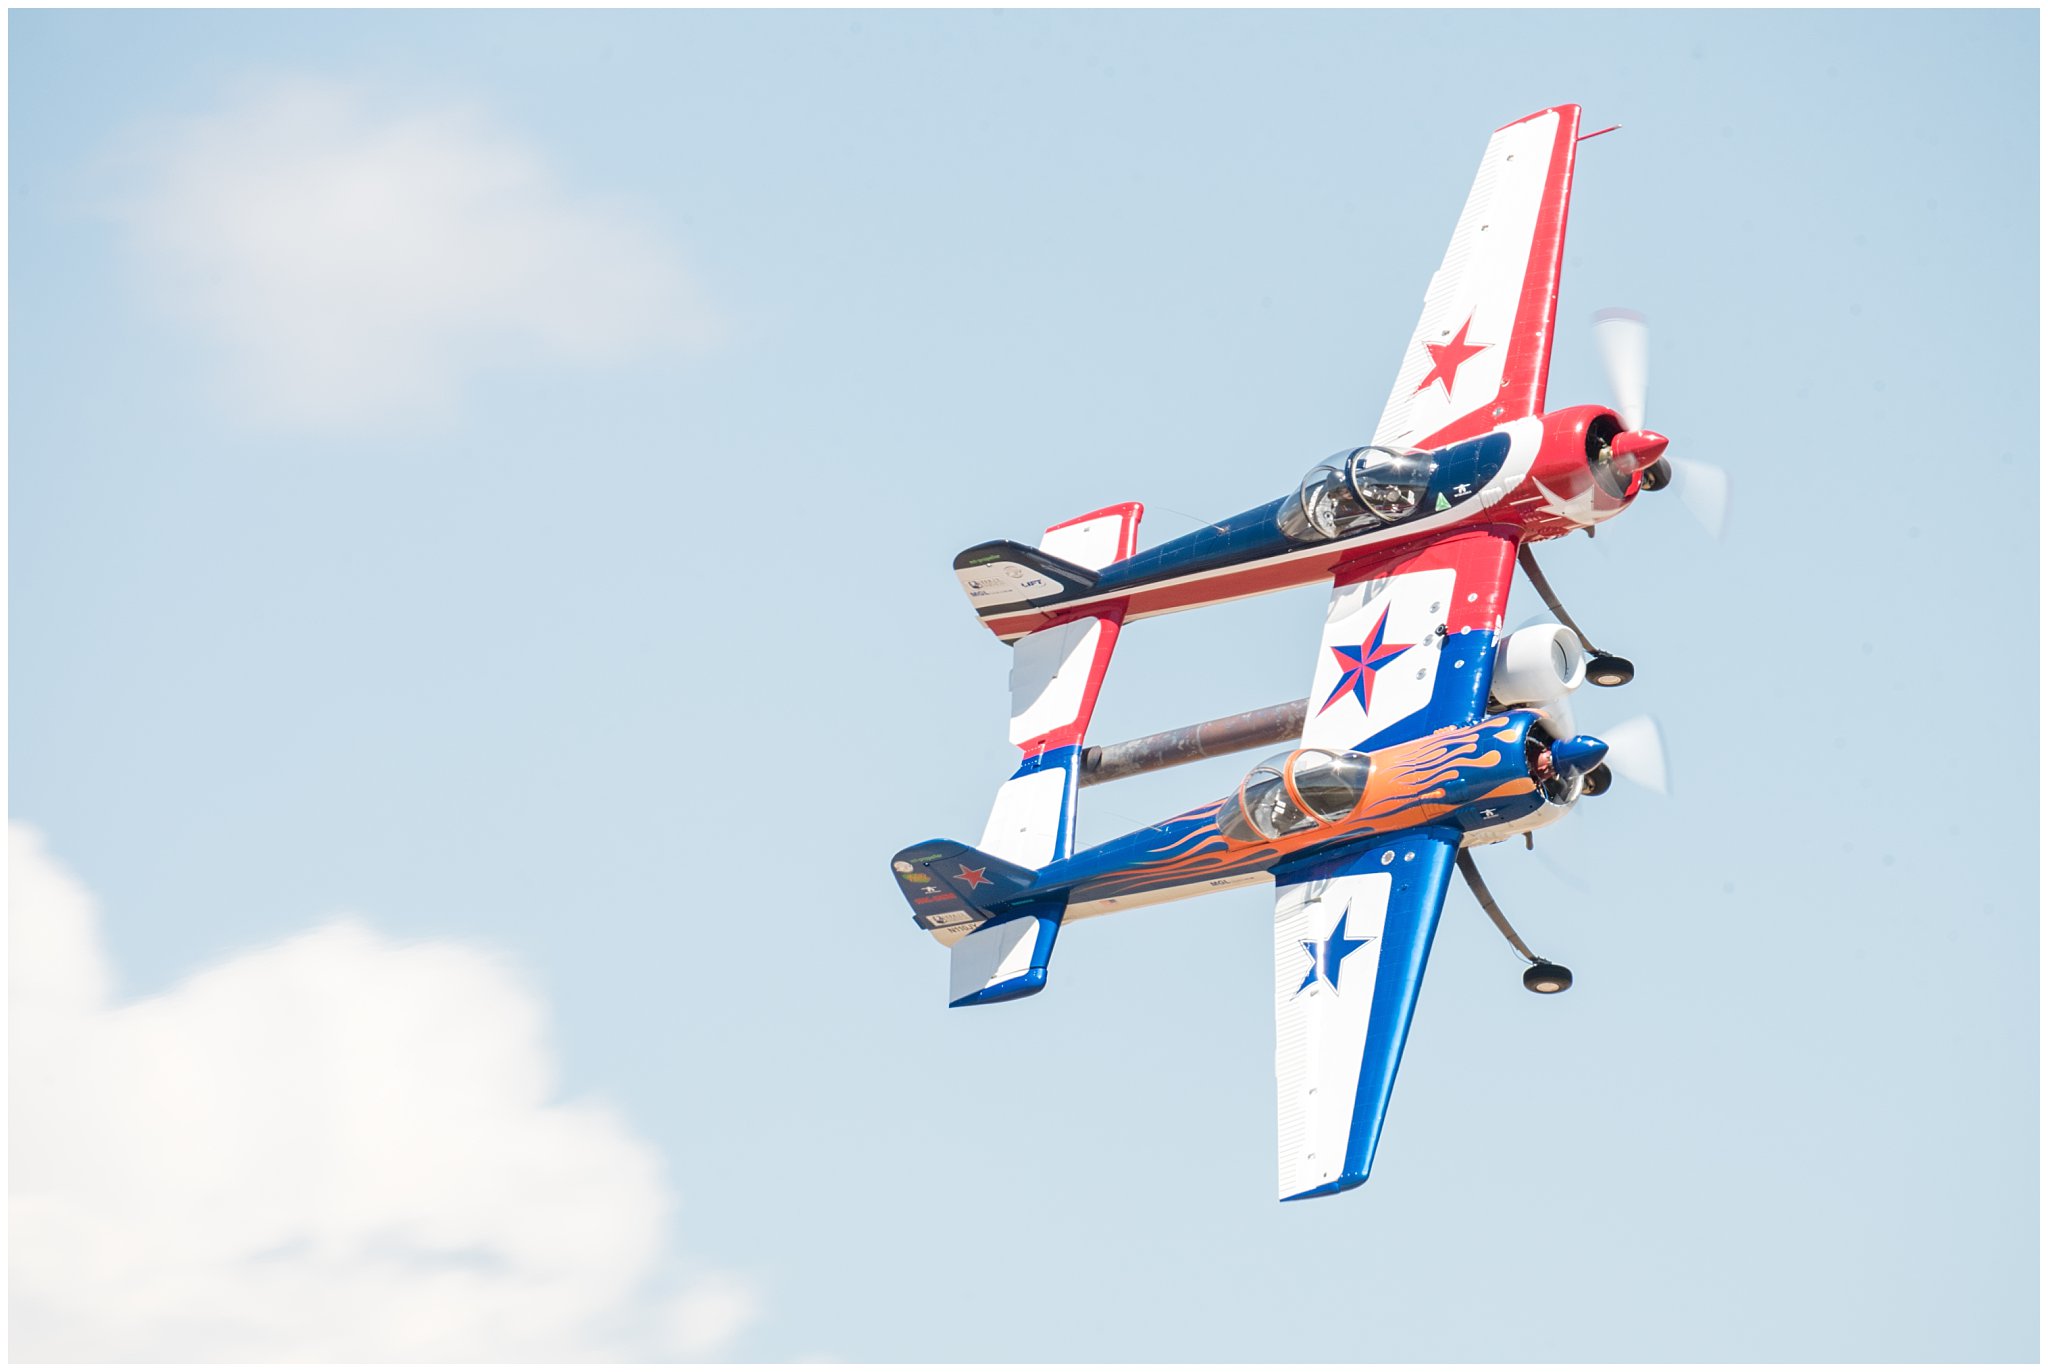 Jeff Boerboon in the Yak 110 at the Warriors over the Wasatch Airshow 2018